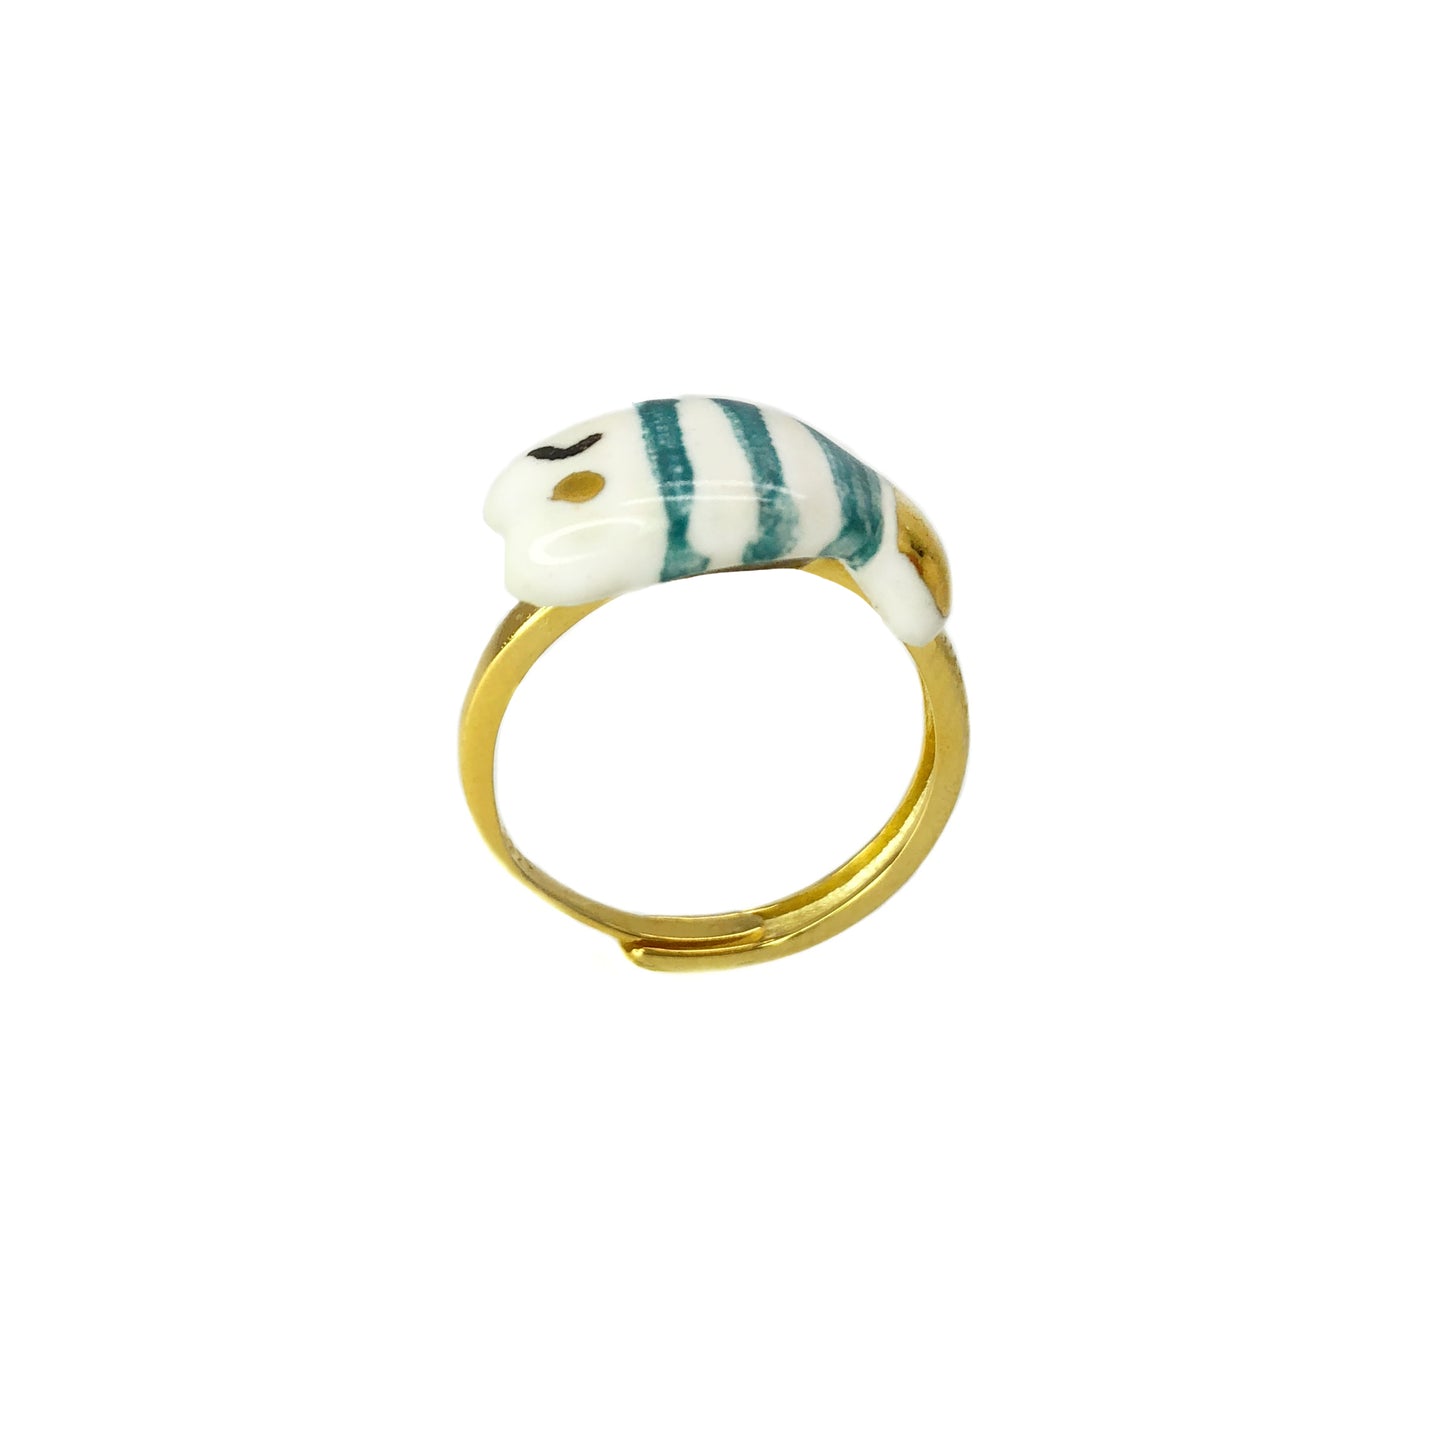 Little fish ring in aquamarine and gold